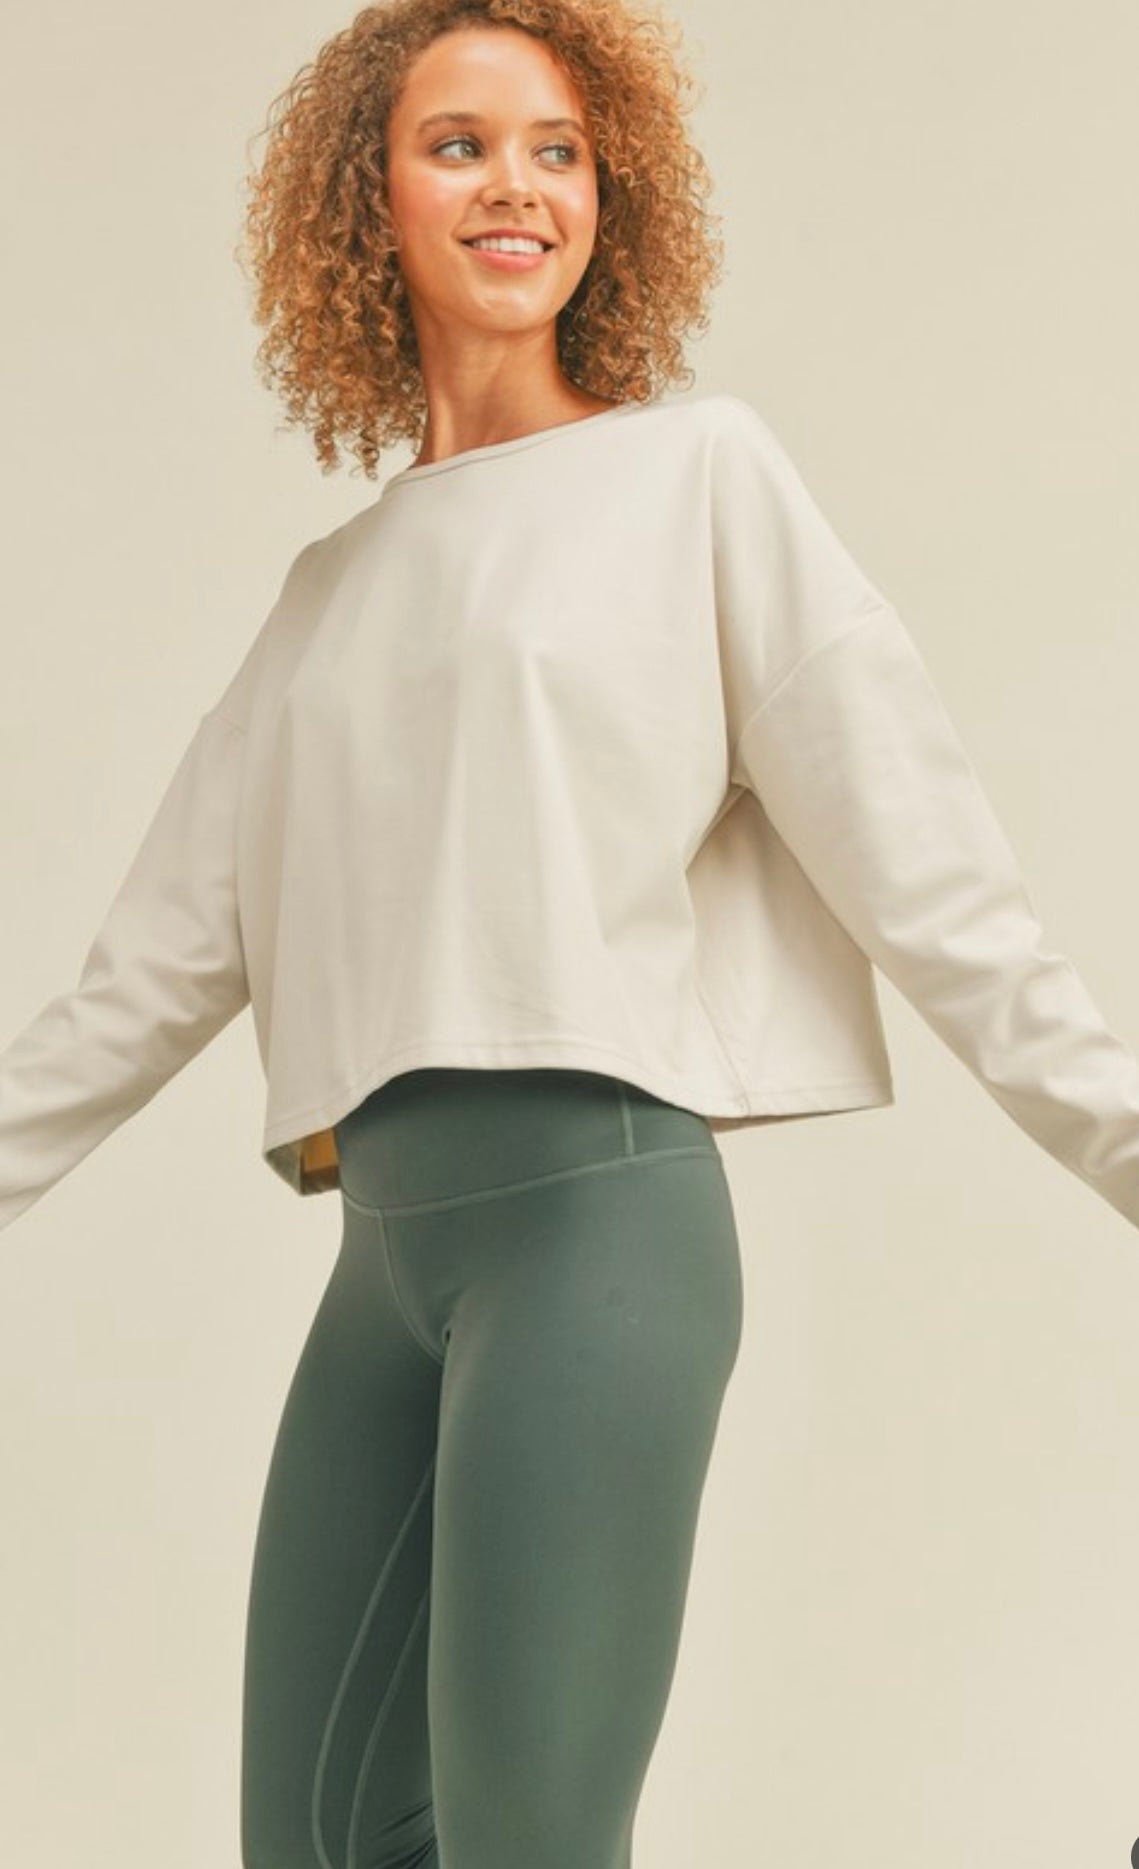 The Kim Cropped Workout Pullover